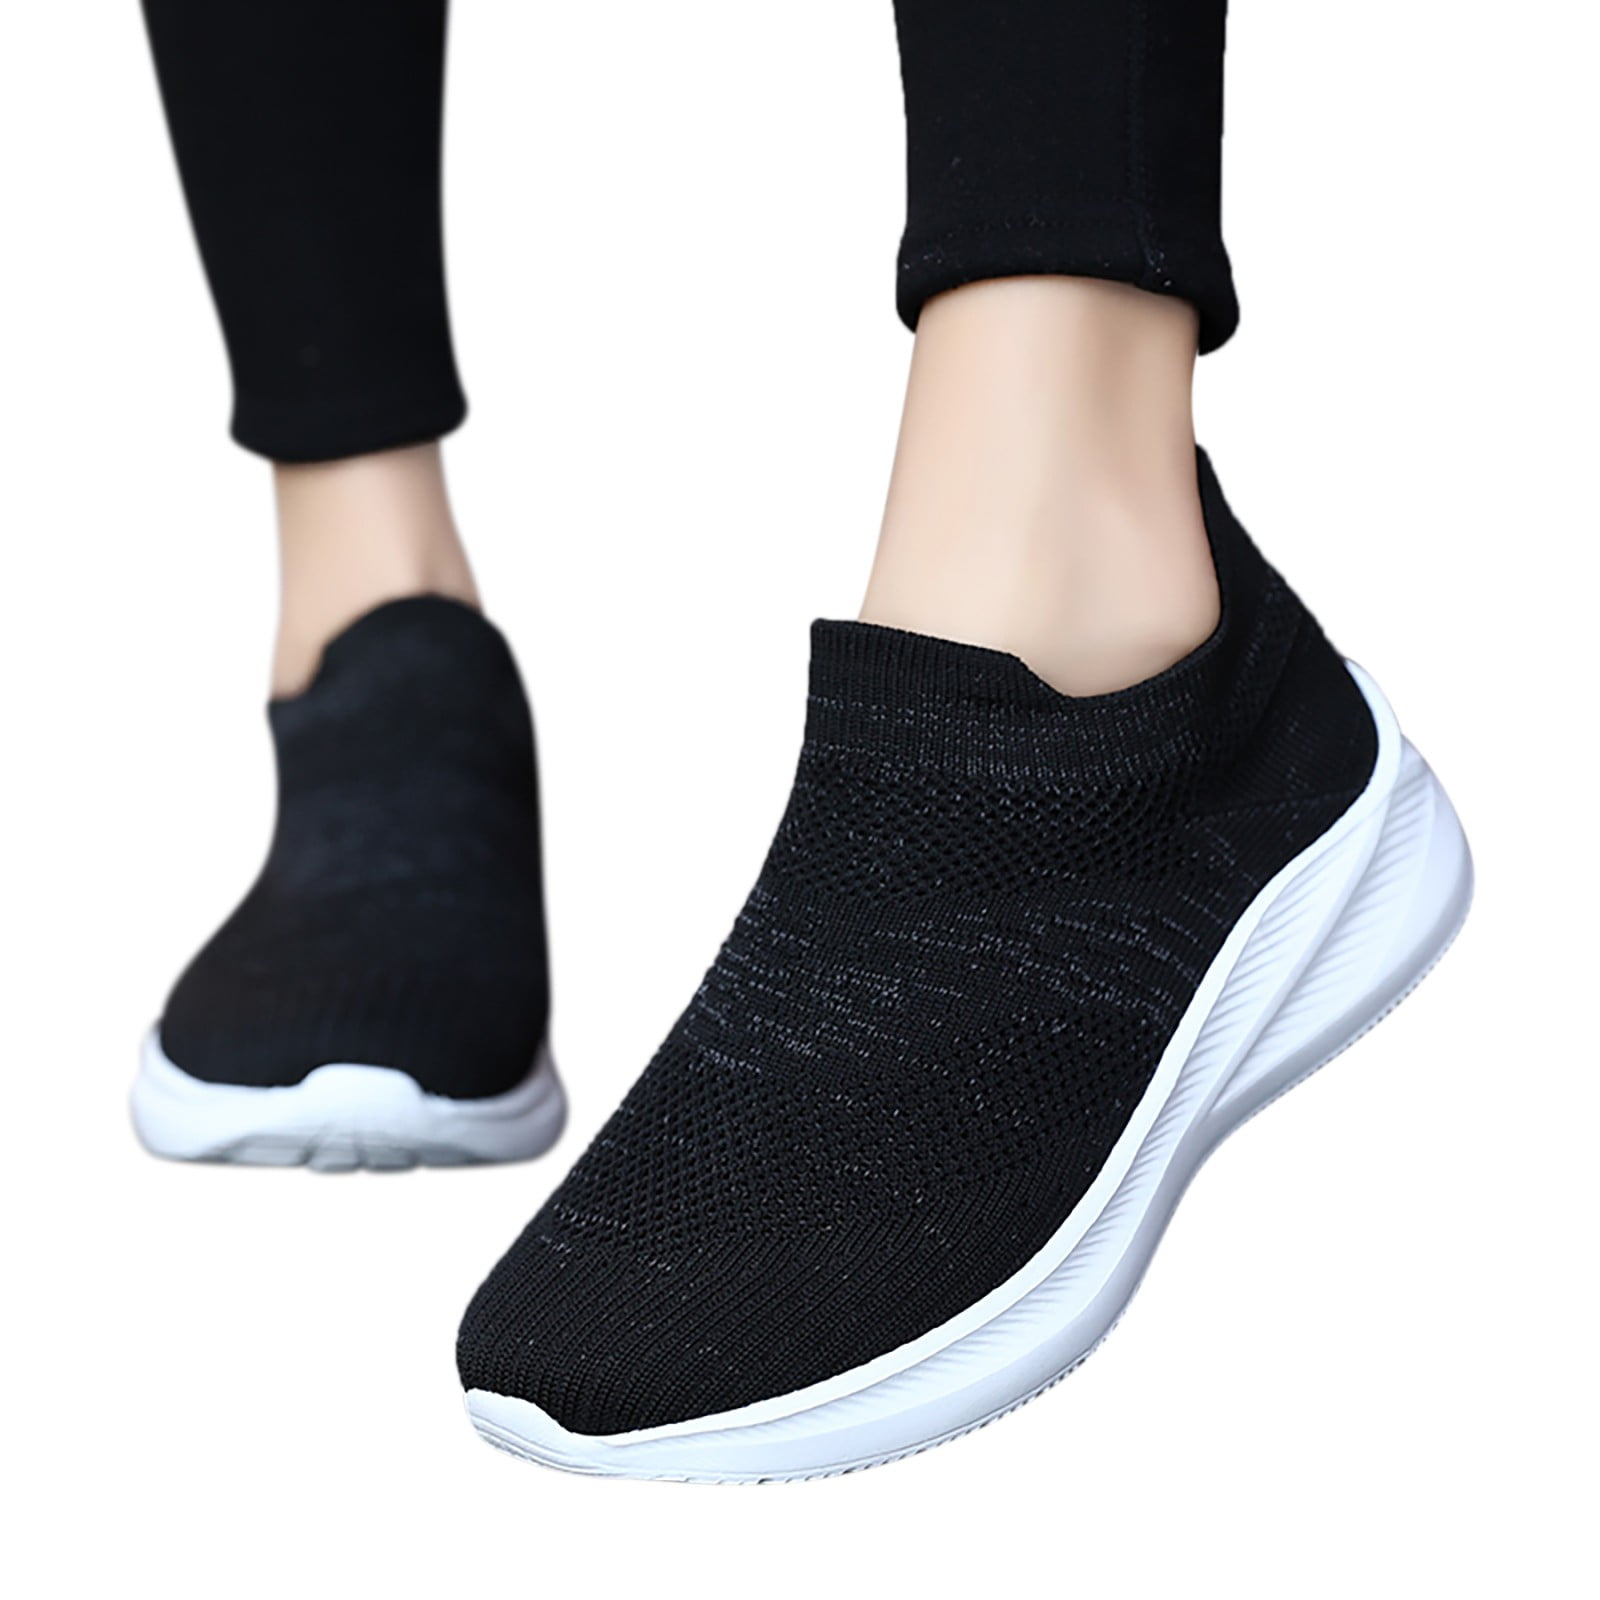 2023 Summer Fashion Women Crystal Sports Shoes Outdoor Sneakers Mesh  Breathable Lightweight White Shoes Campus Casual Tennis